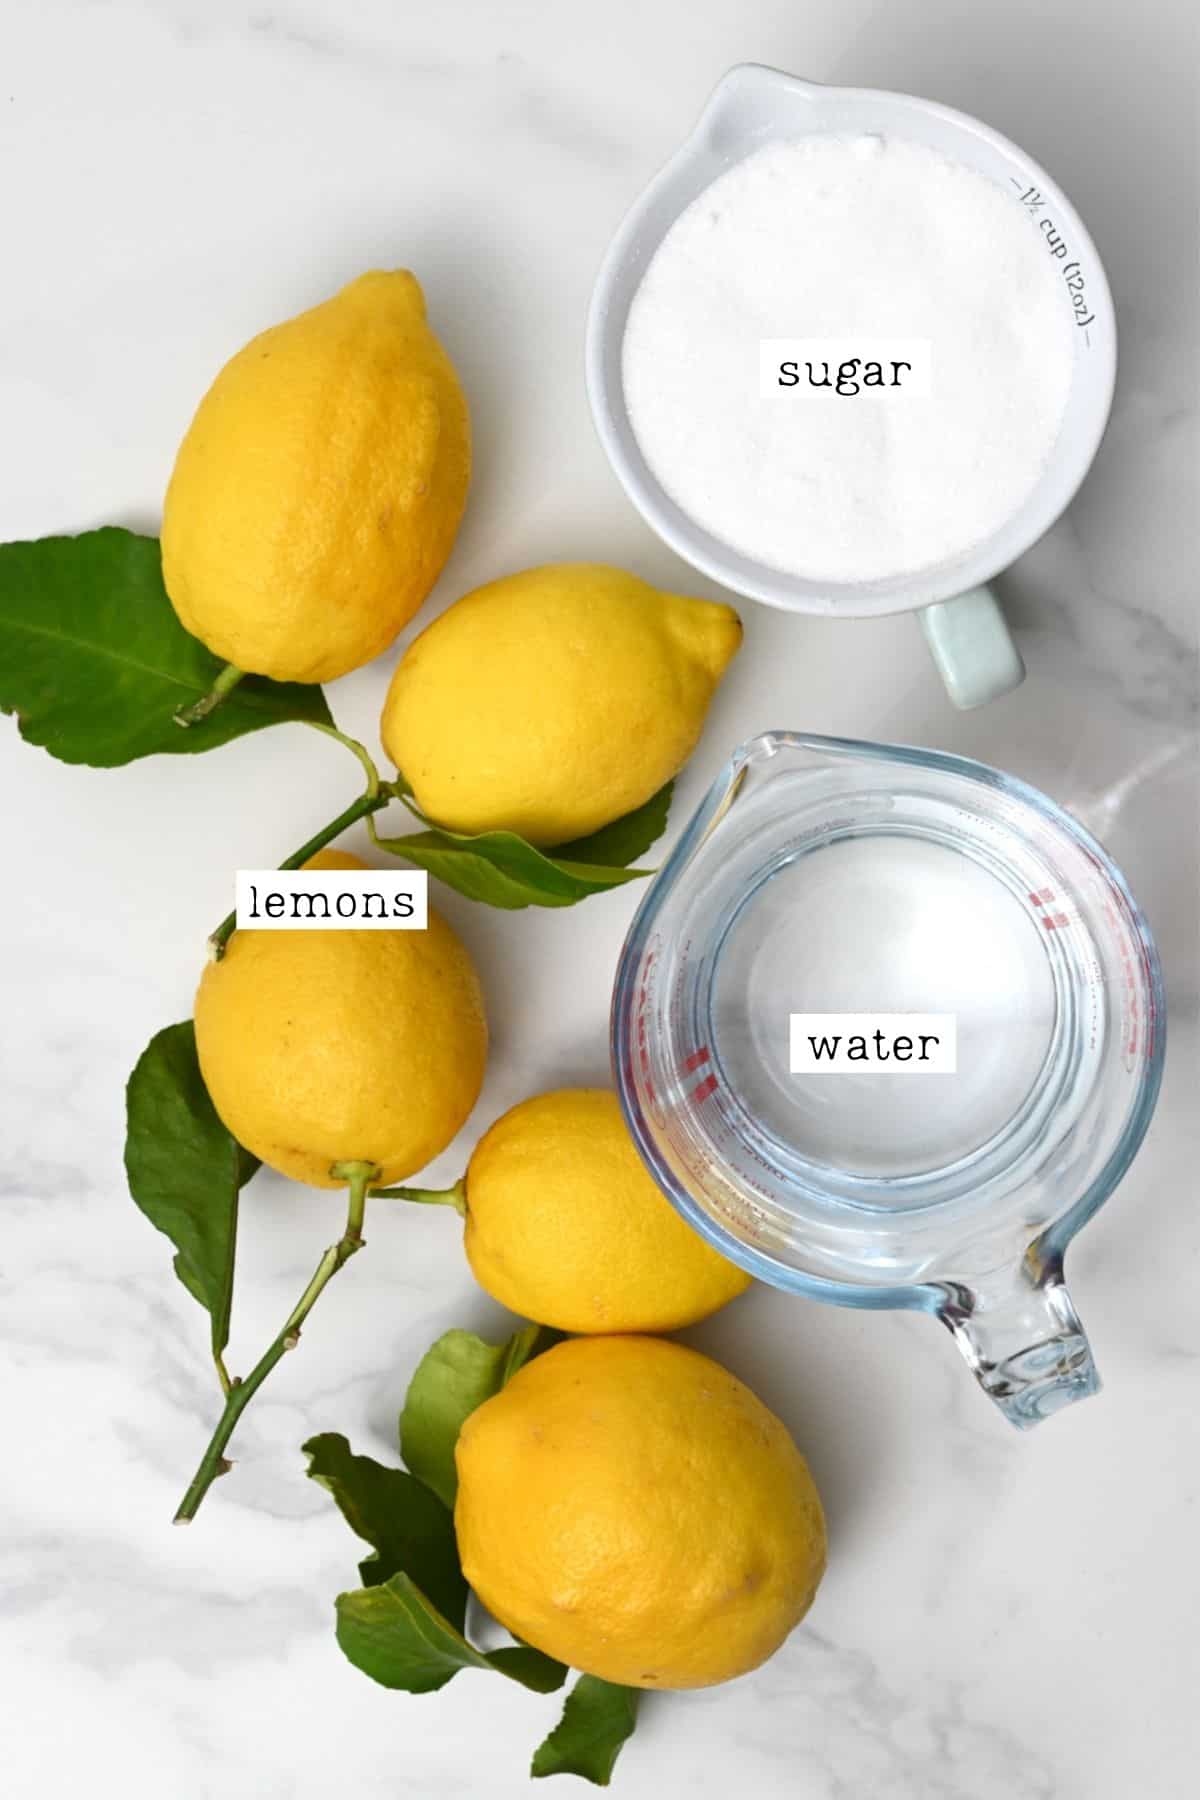 Ingredients for candied lemon slices